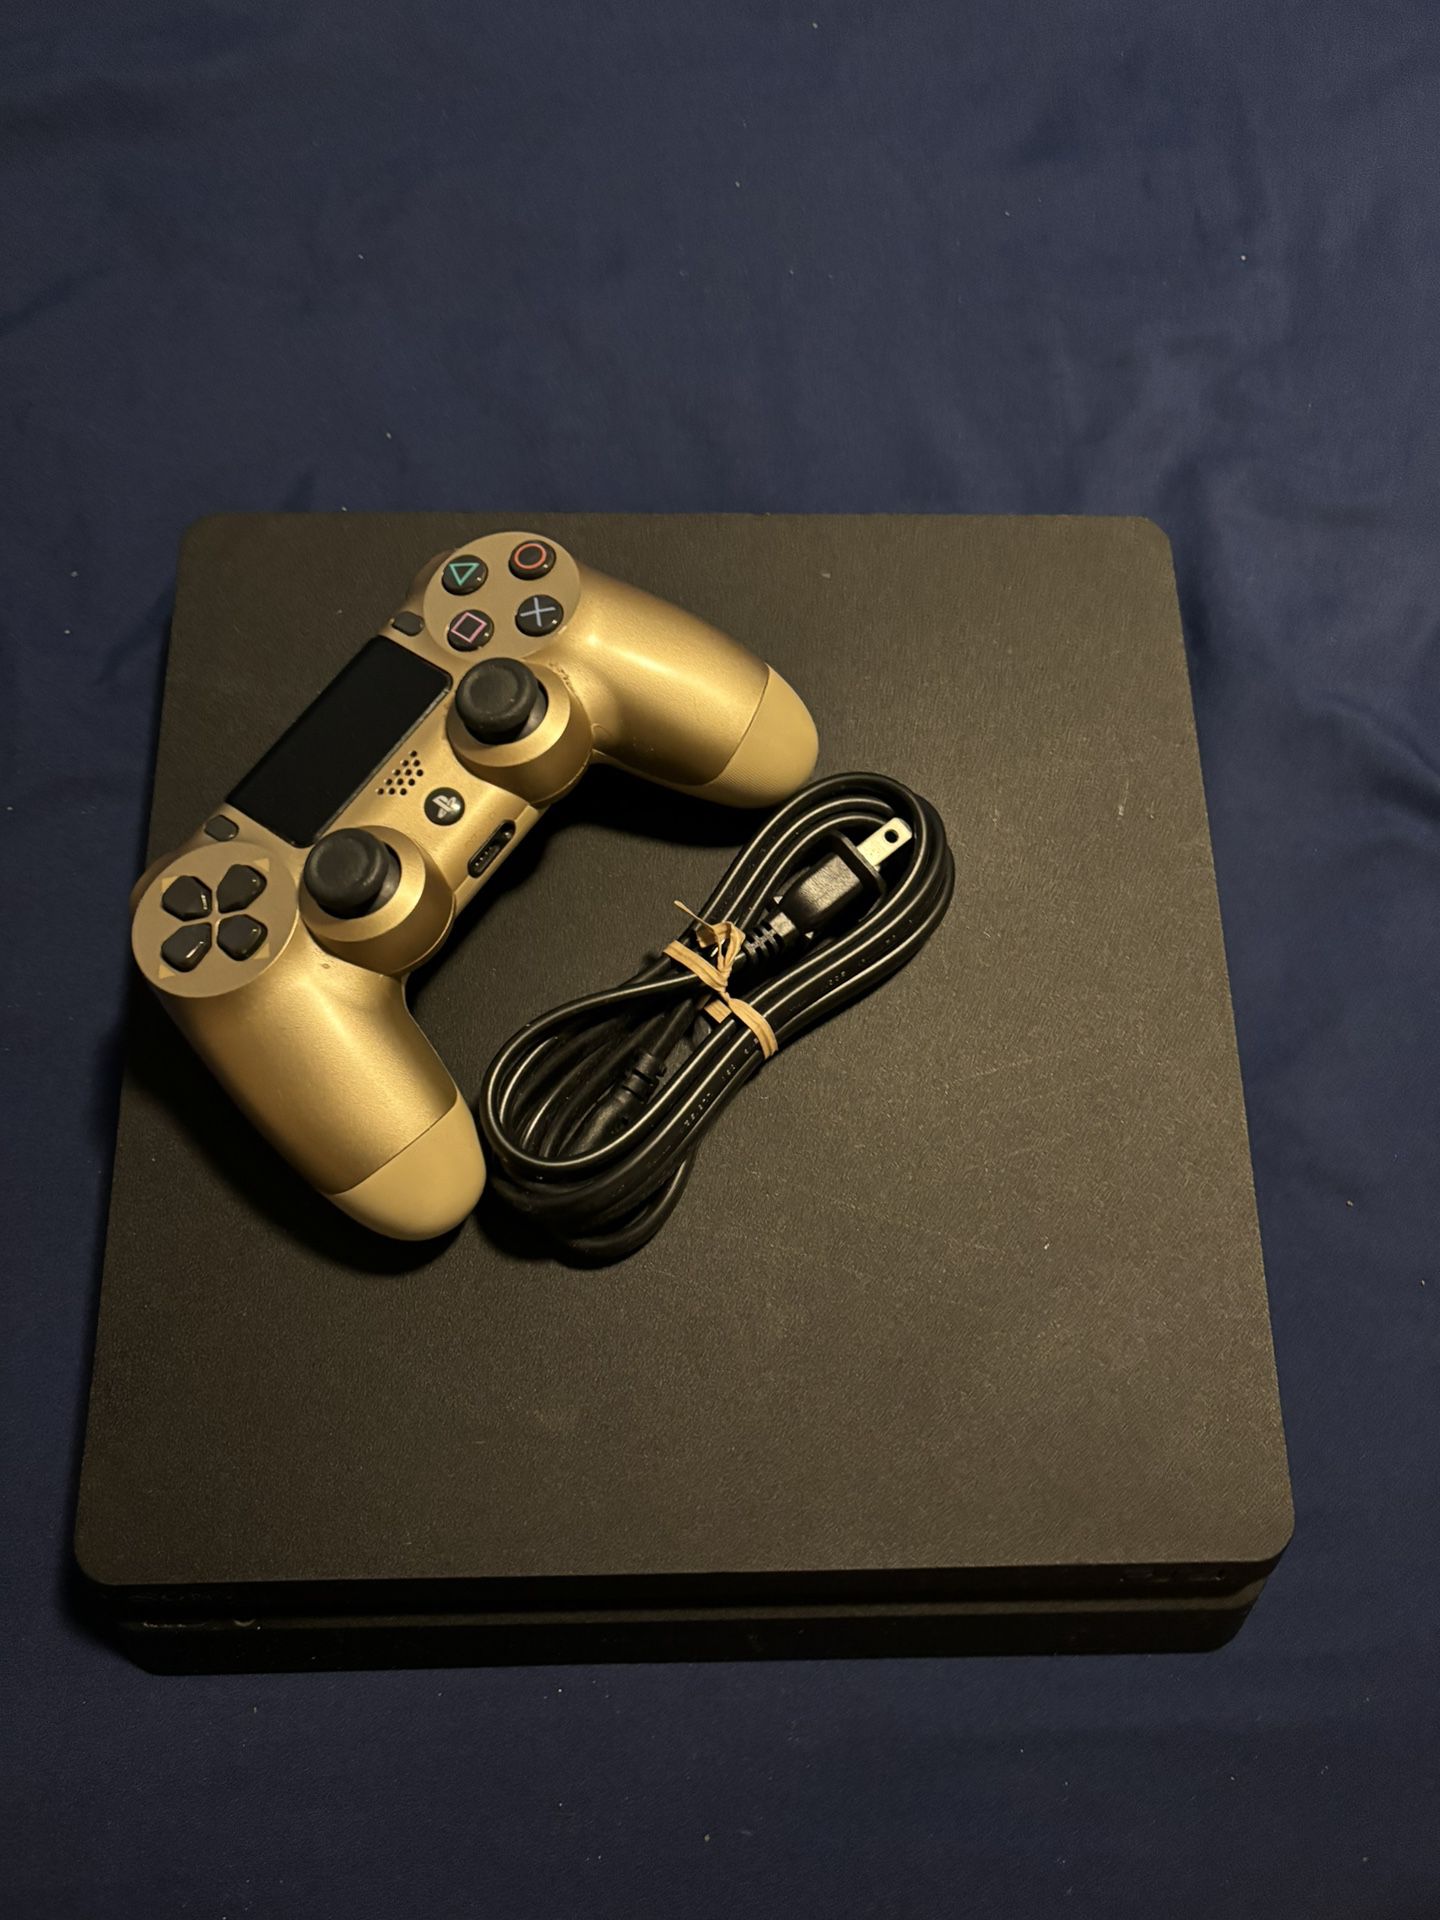 PS4 (used) Comes With Games 